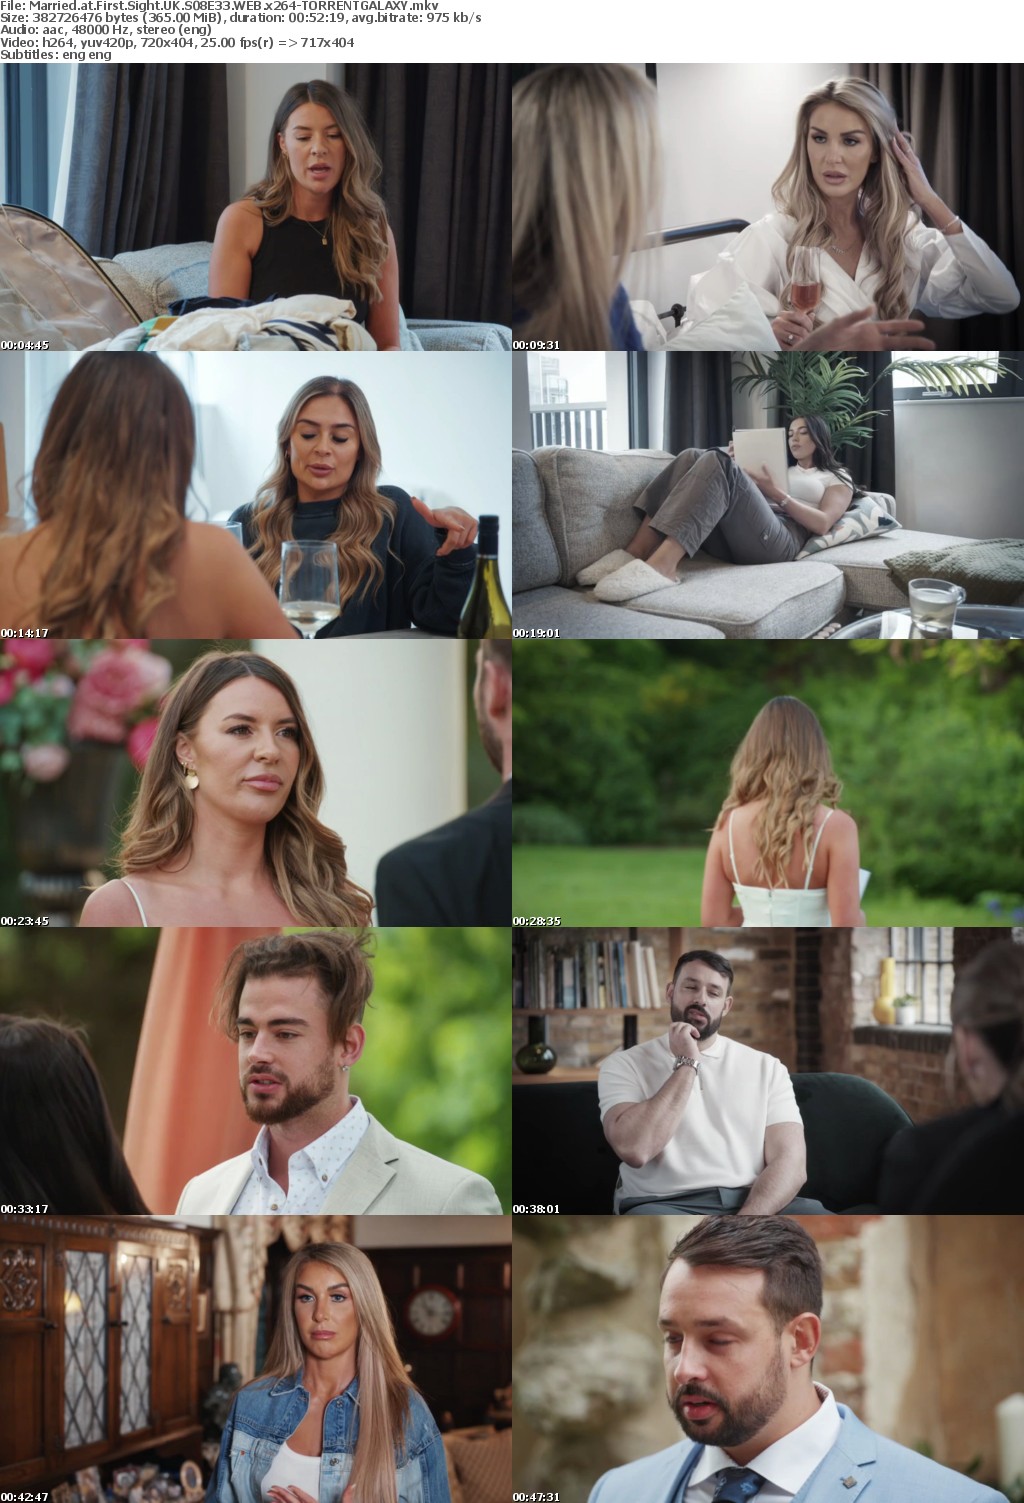 Married at First Sight UK S08E33 WEB x264-GALAXY